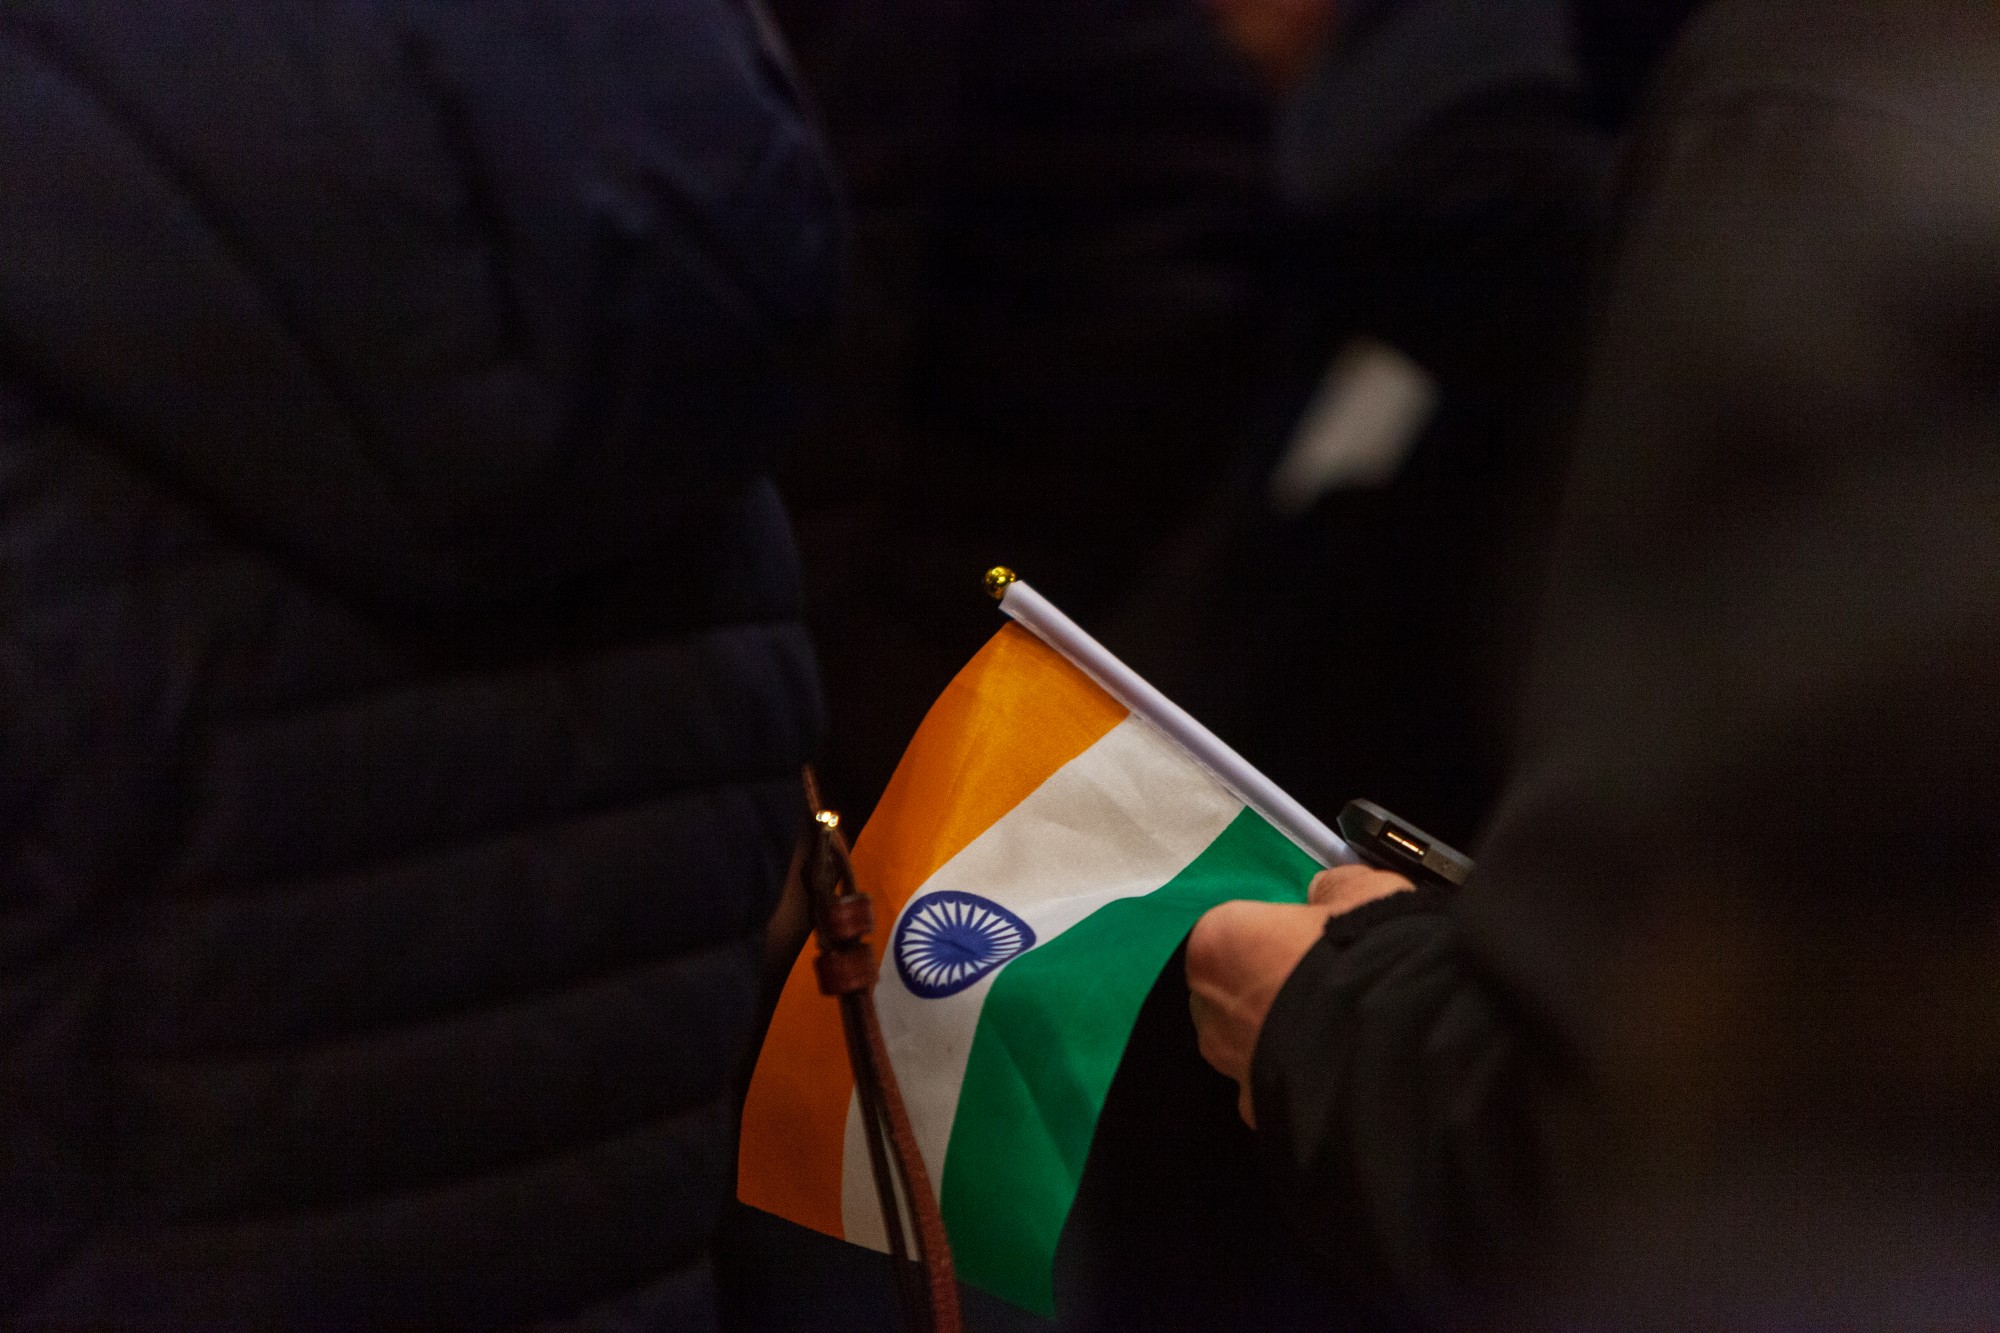 An attendee clutches a miniature Indian flag at an event opposing Indias recent passage of the Citizenship Amendment Act at the Minnesota State Capitol Building on Sunday, Jan. 26. This legislation offers Indian citizenship to refugees of several religious groups, but does not apply to Muslims, despite their making up nearly 15% of the Indian population.